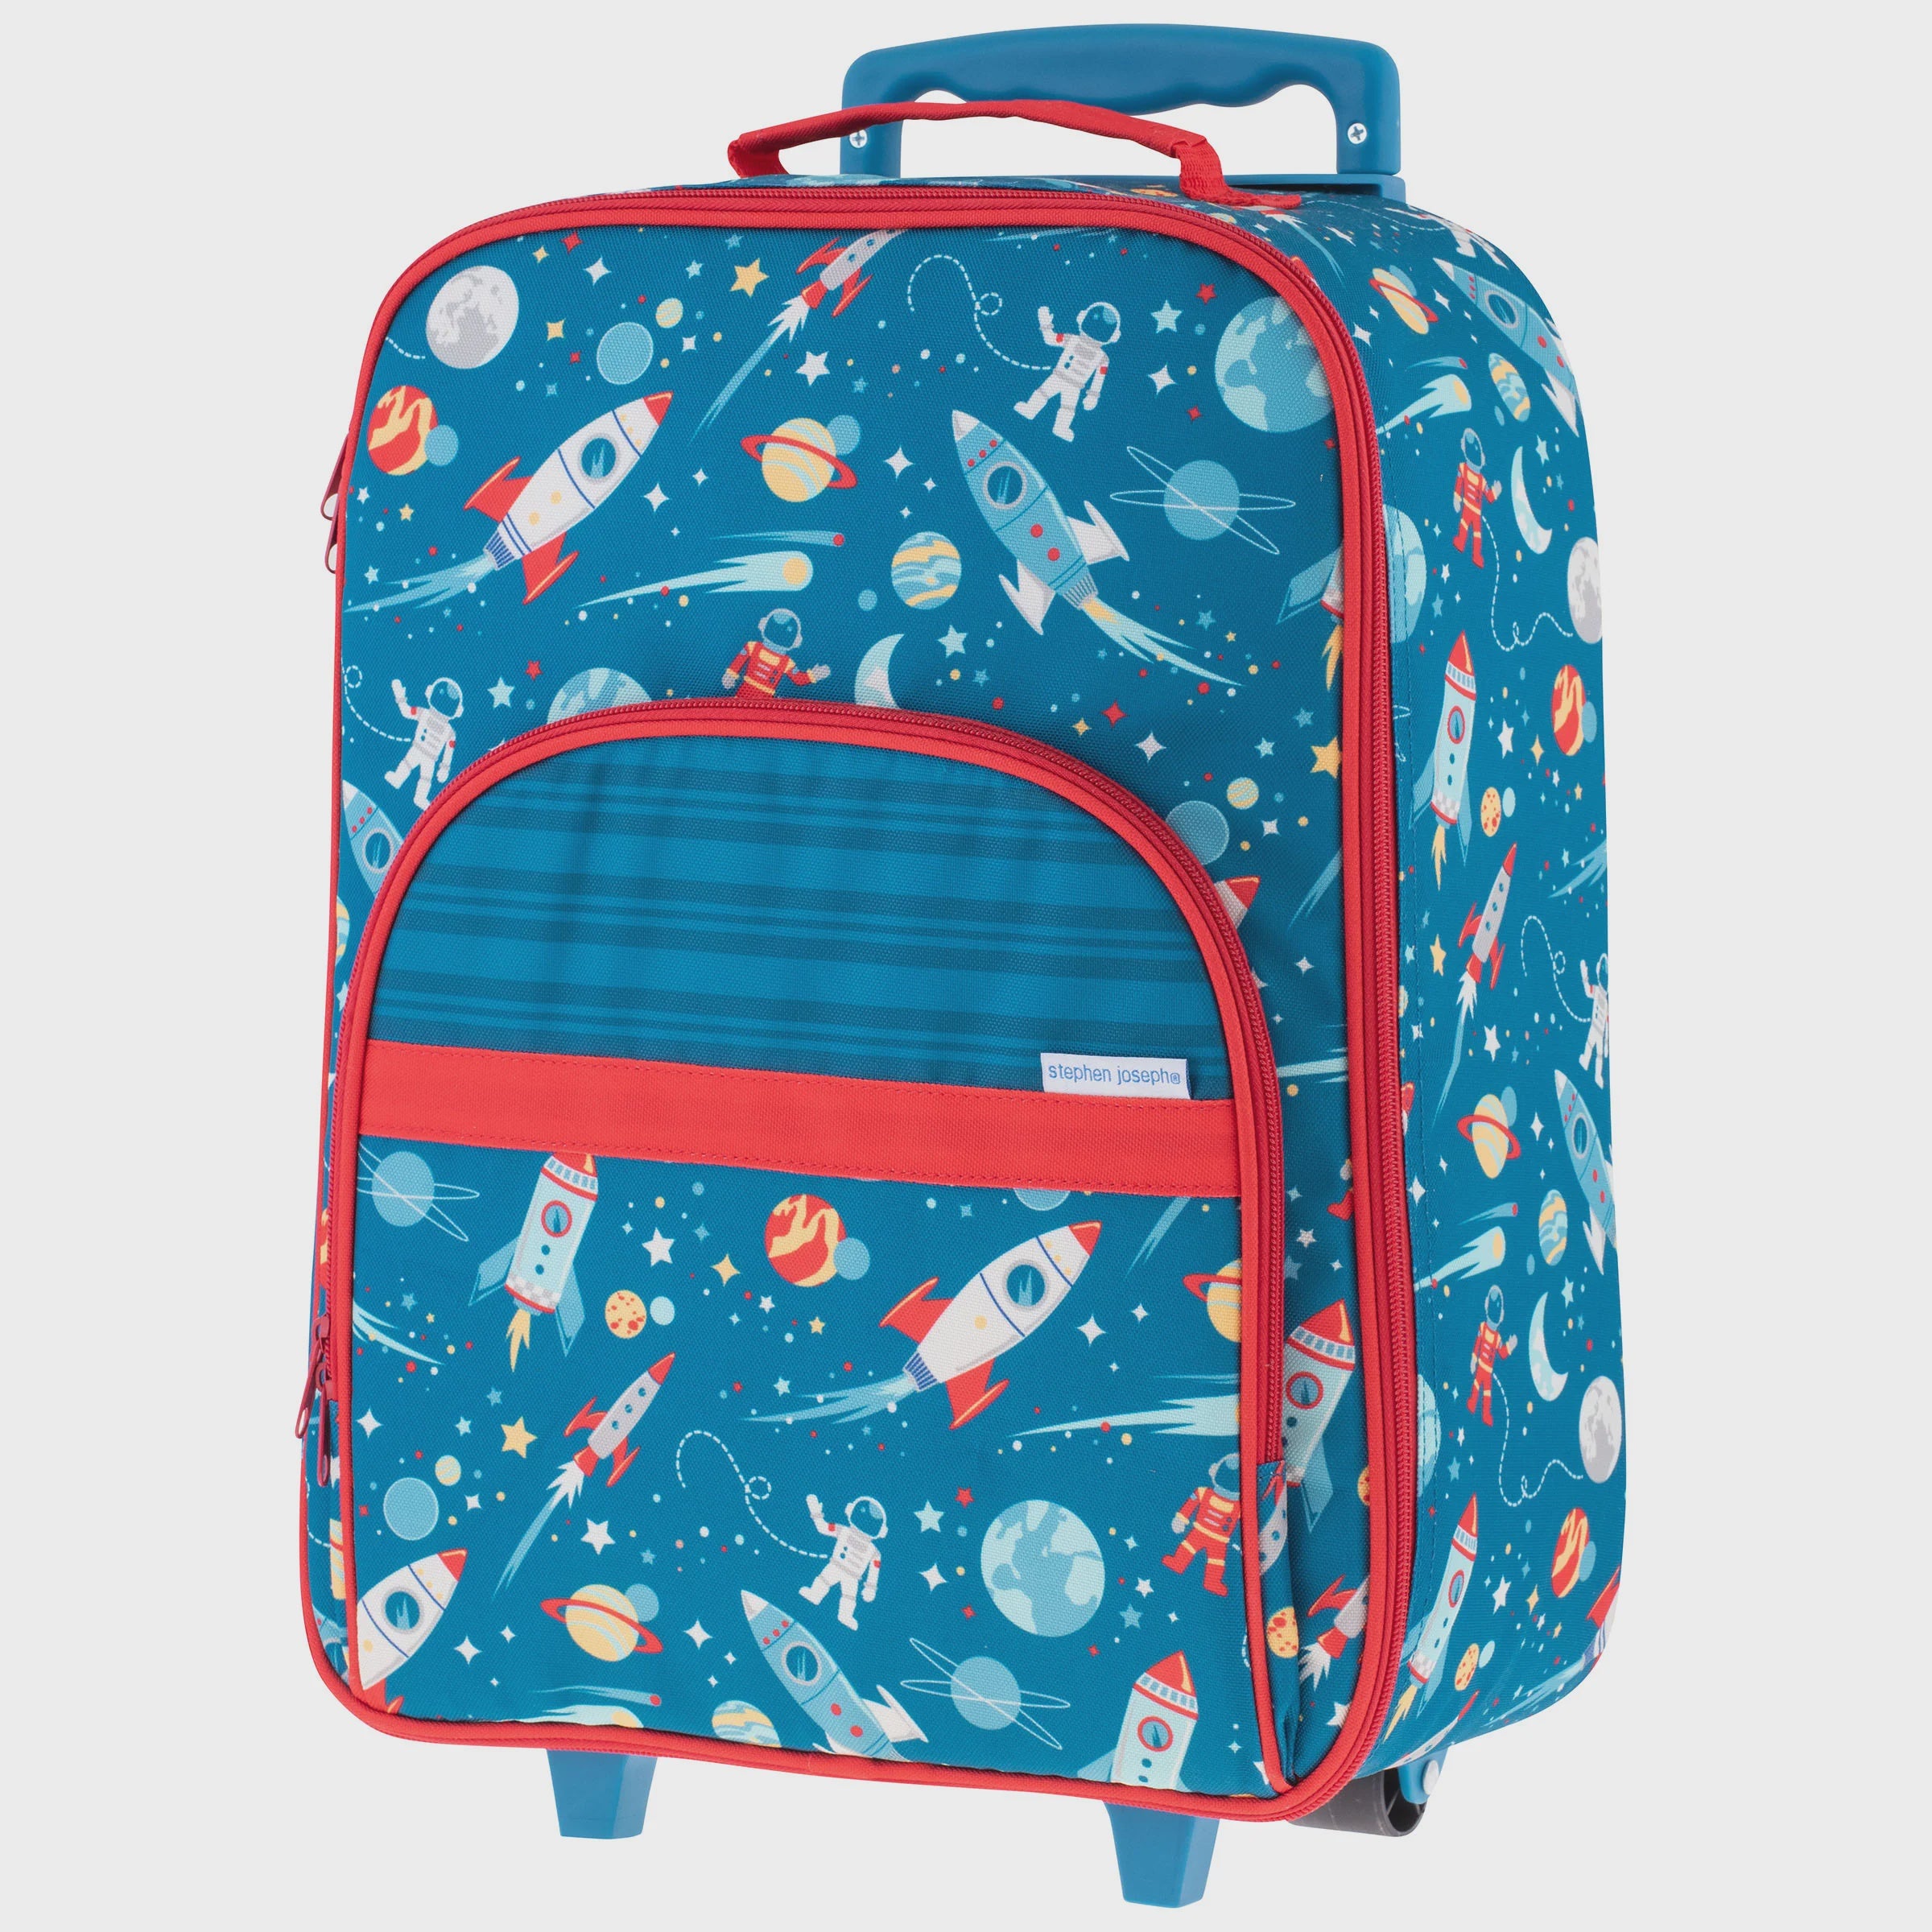 All Over Print Rolling Luggage Space